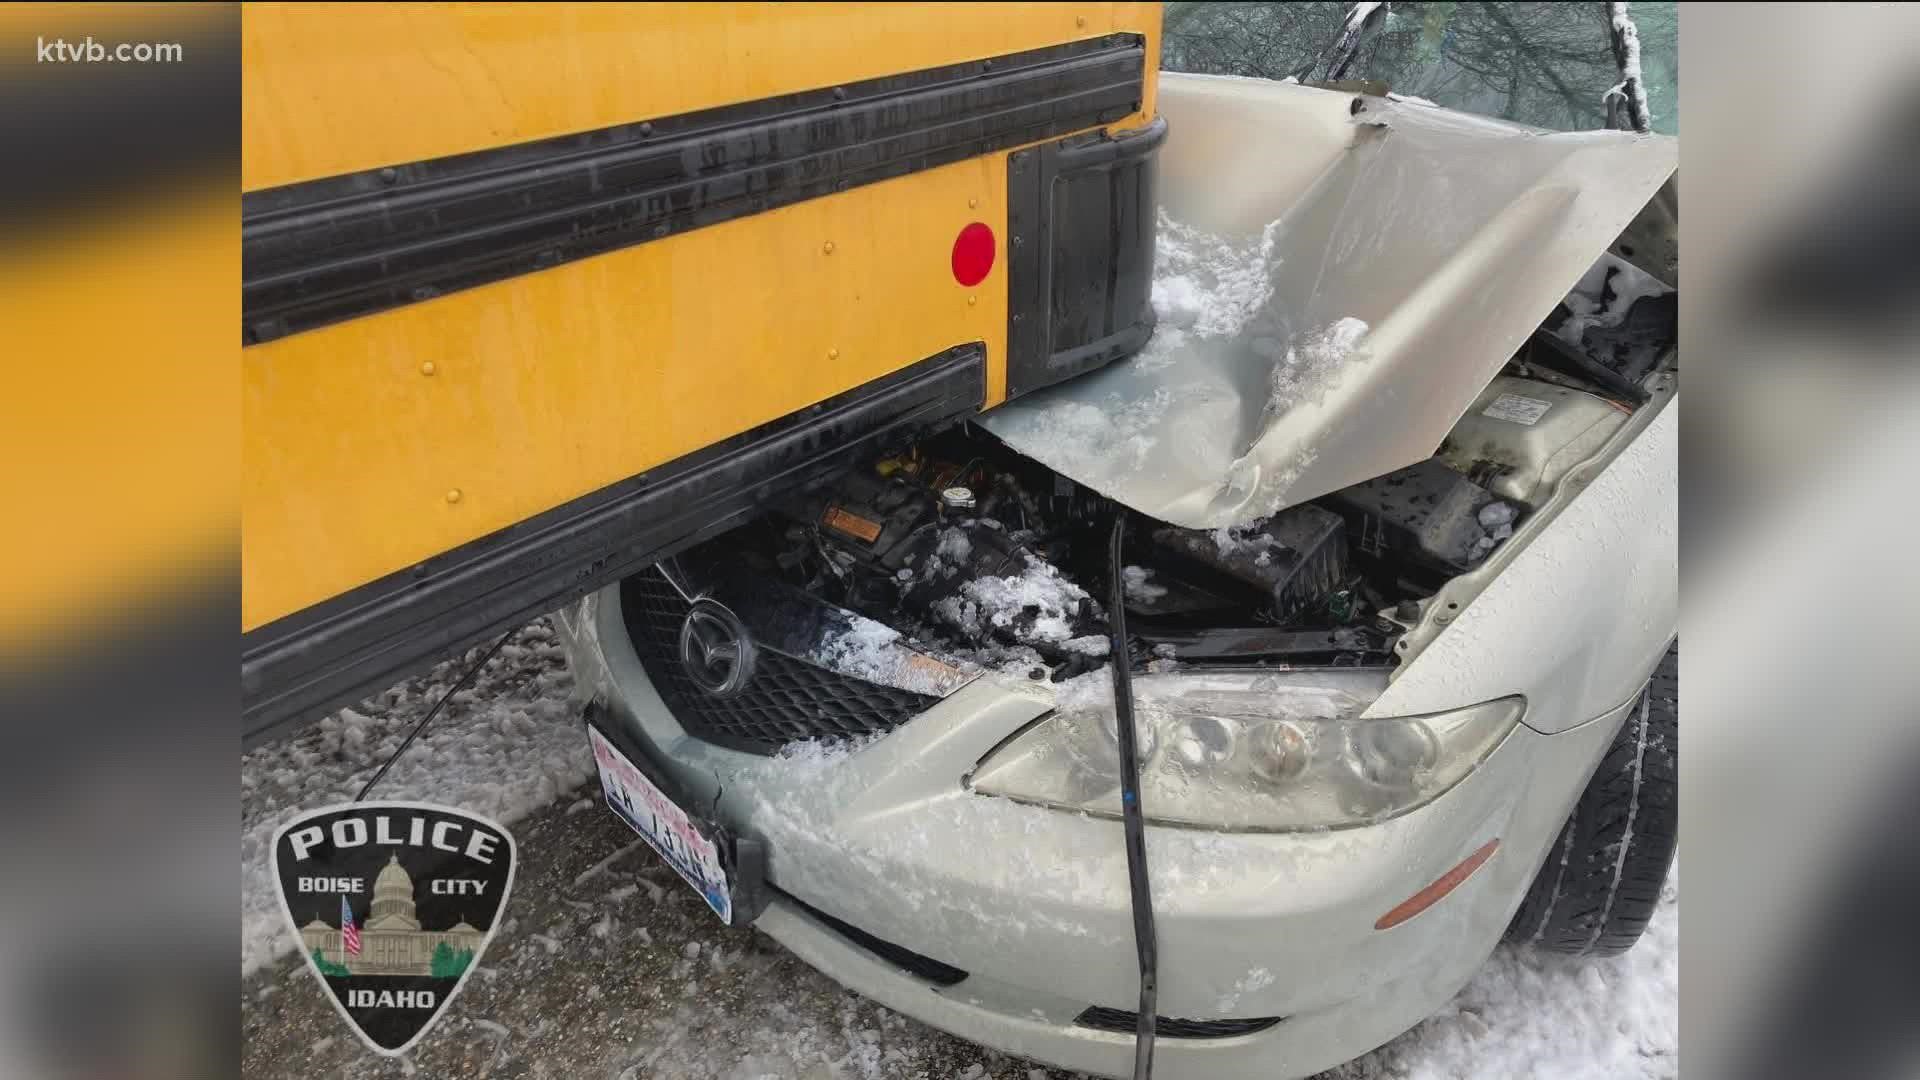 The Boise Police Department responded to a traffic collision Thursday involving a school bus.